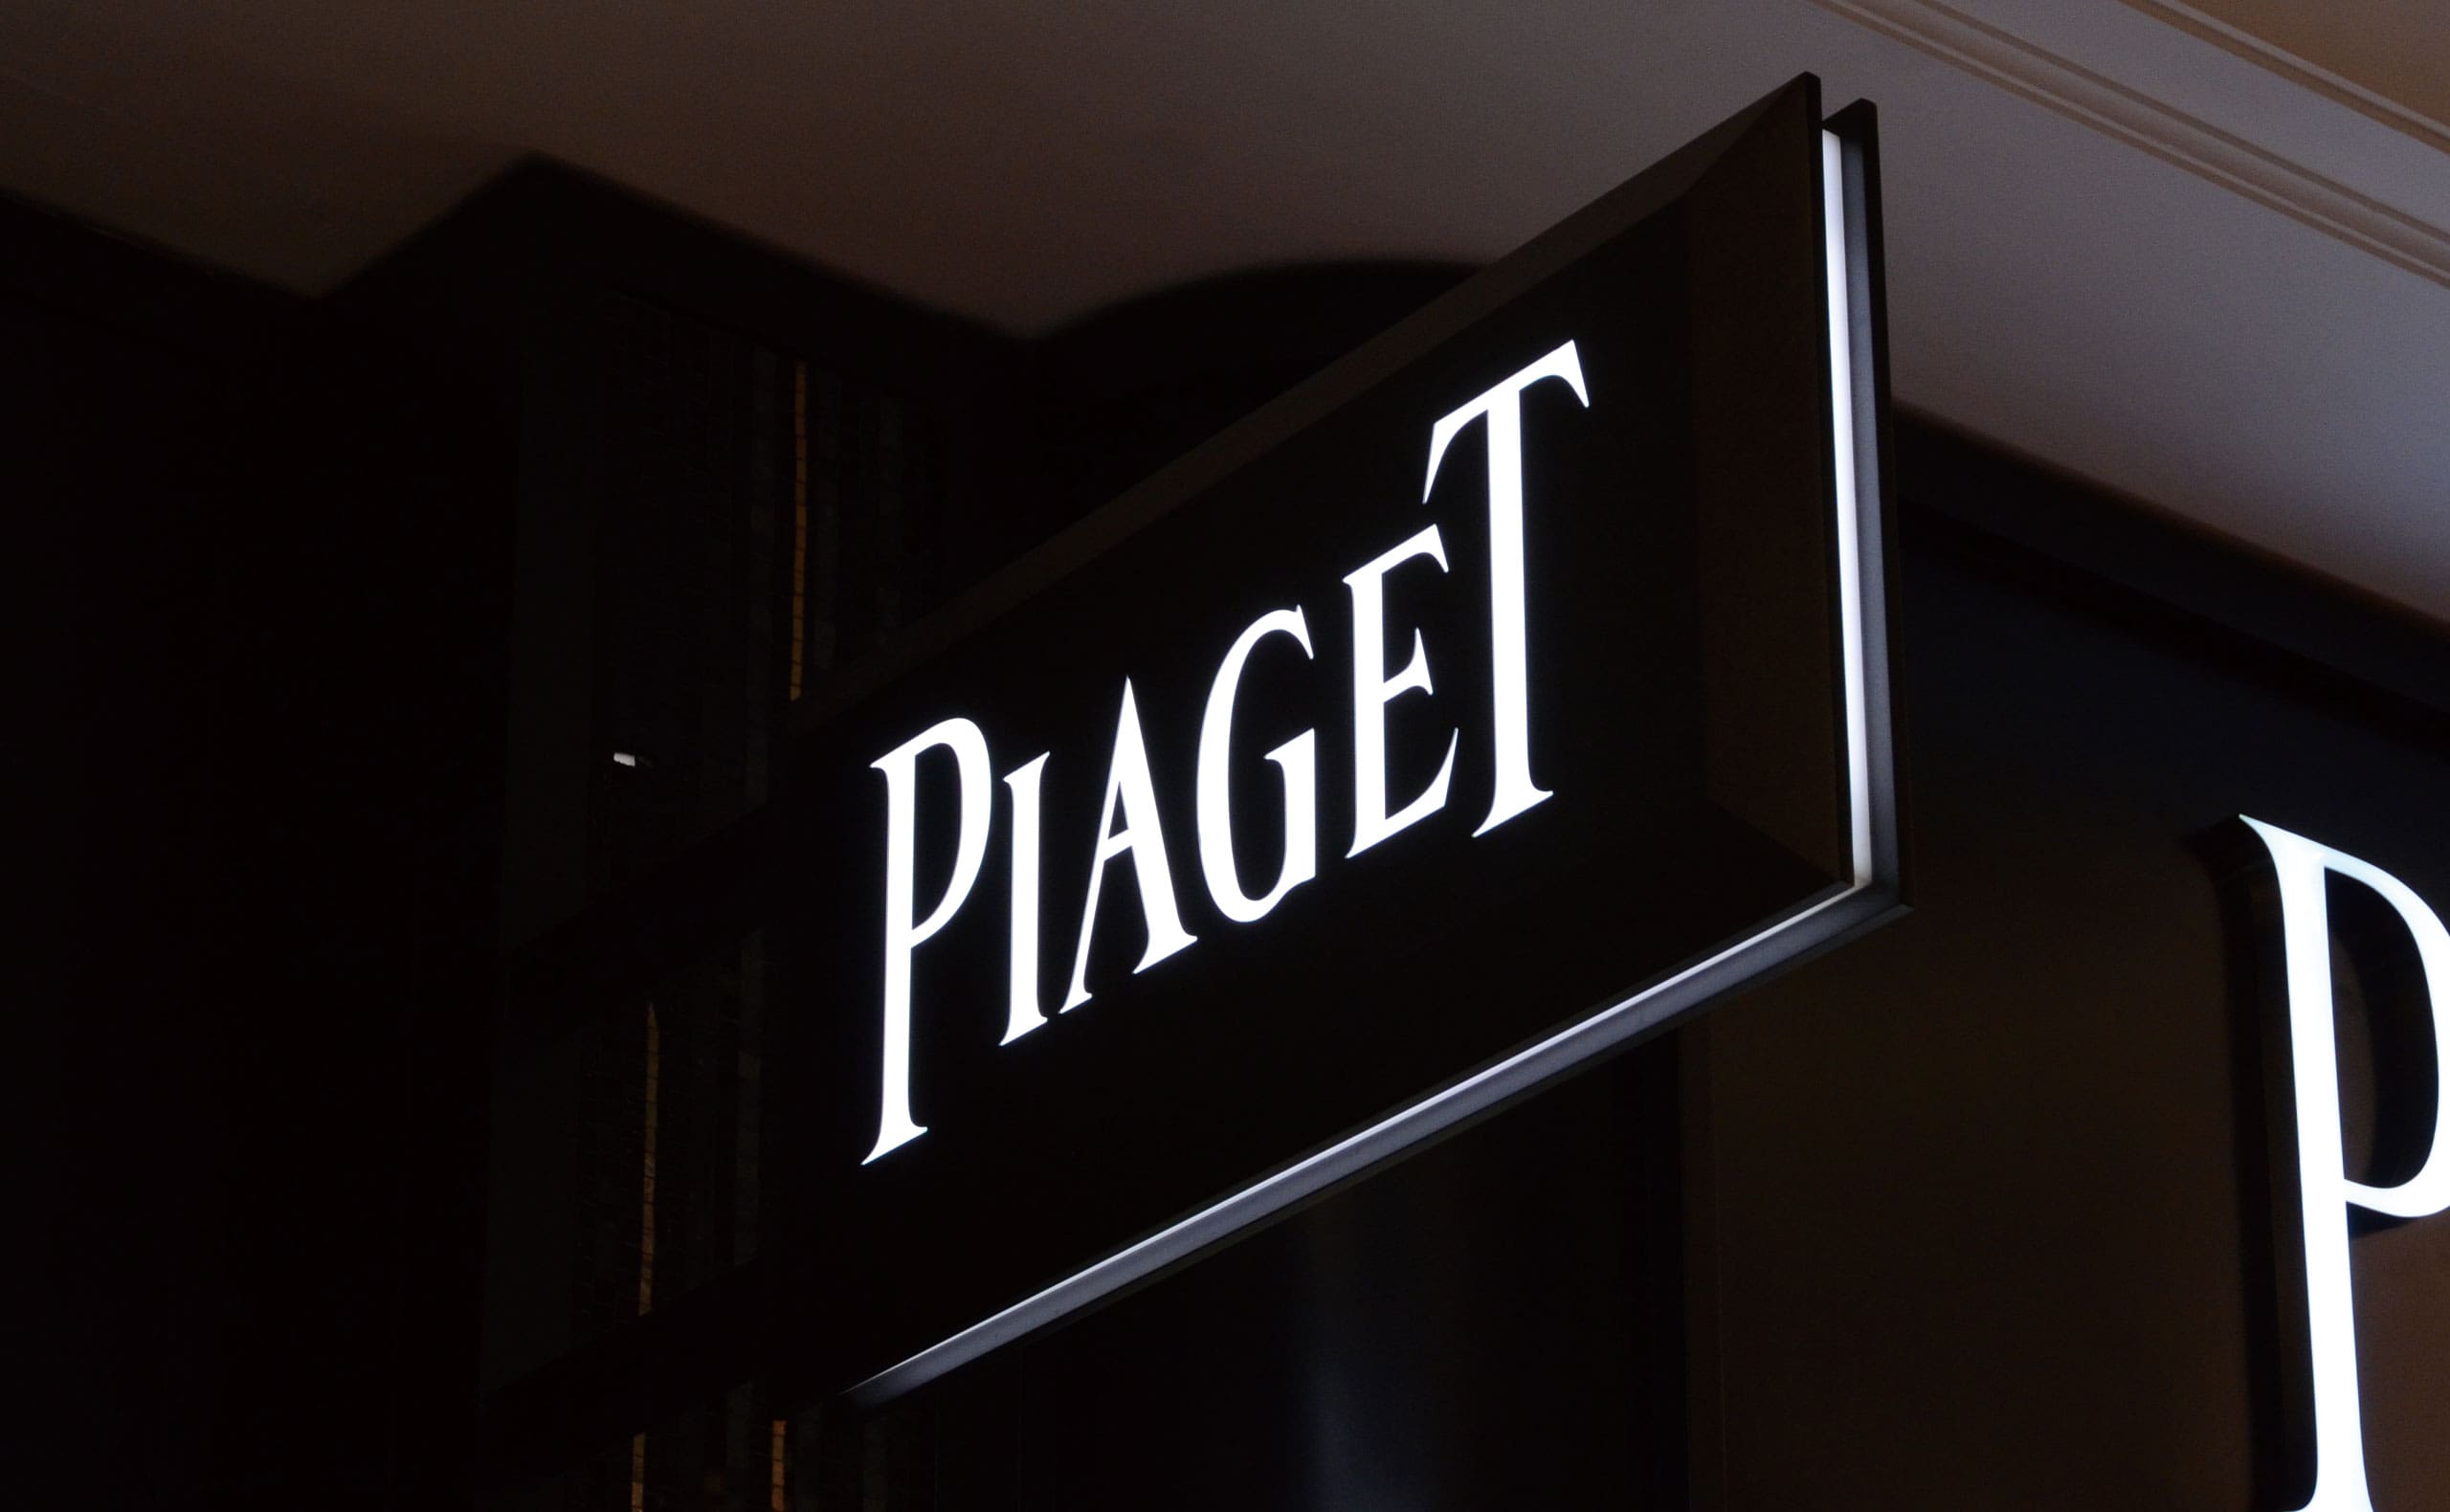 Double Sided Light Box Signs For Piaget